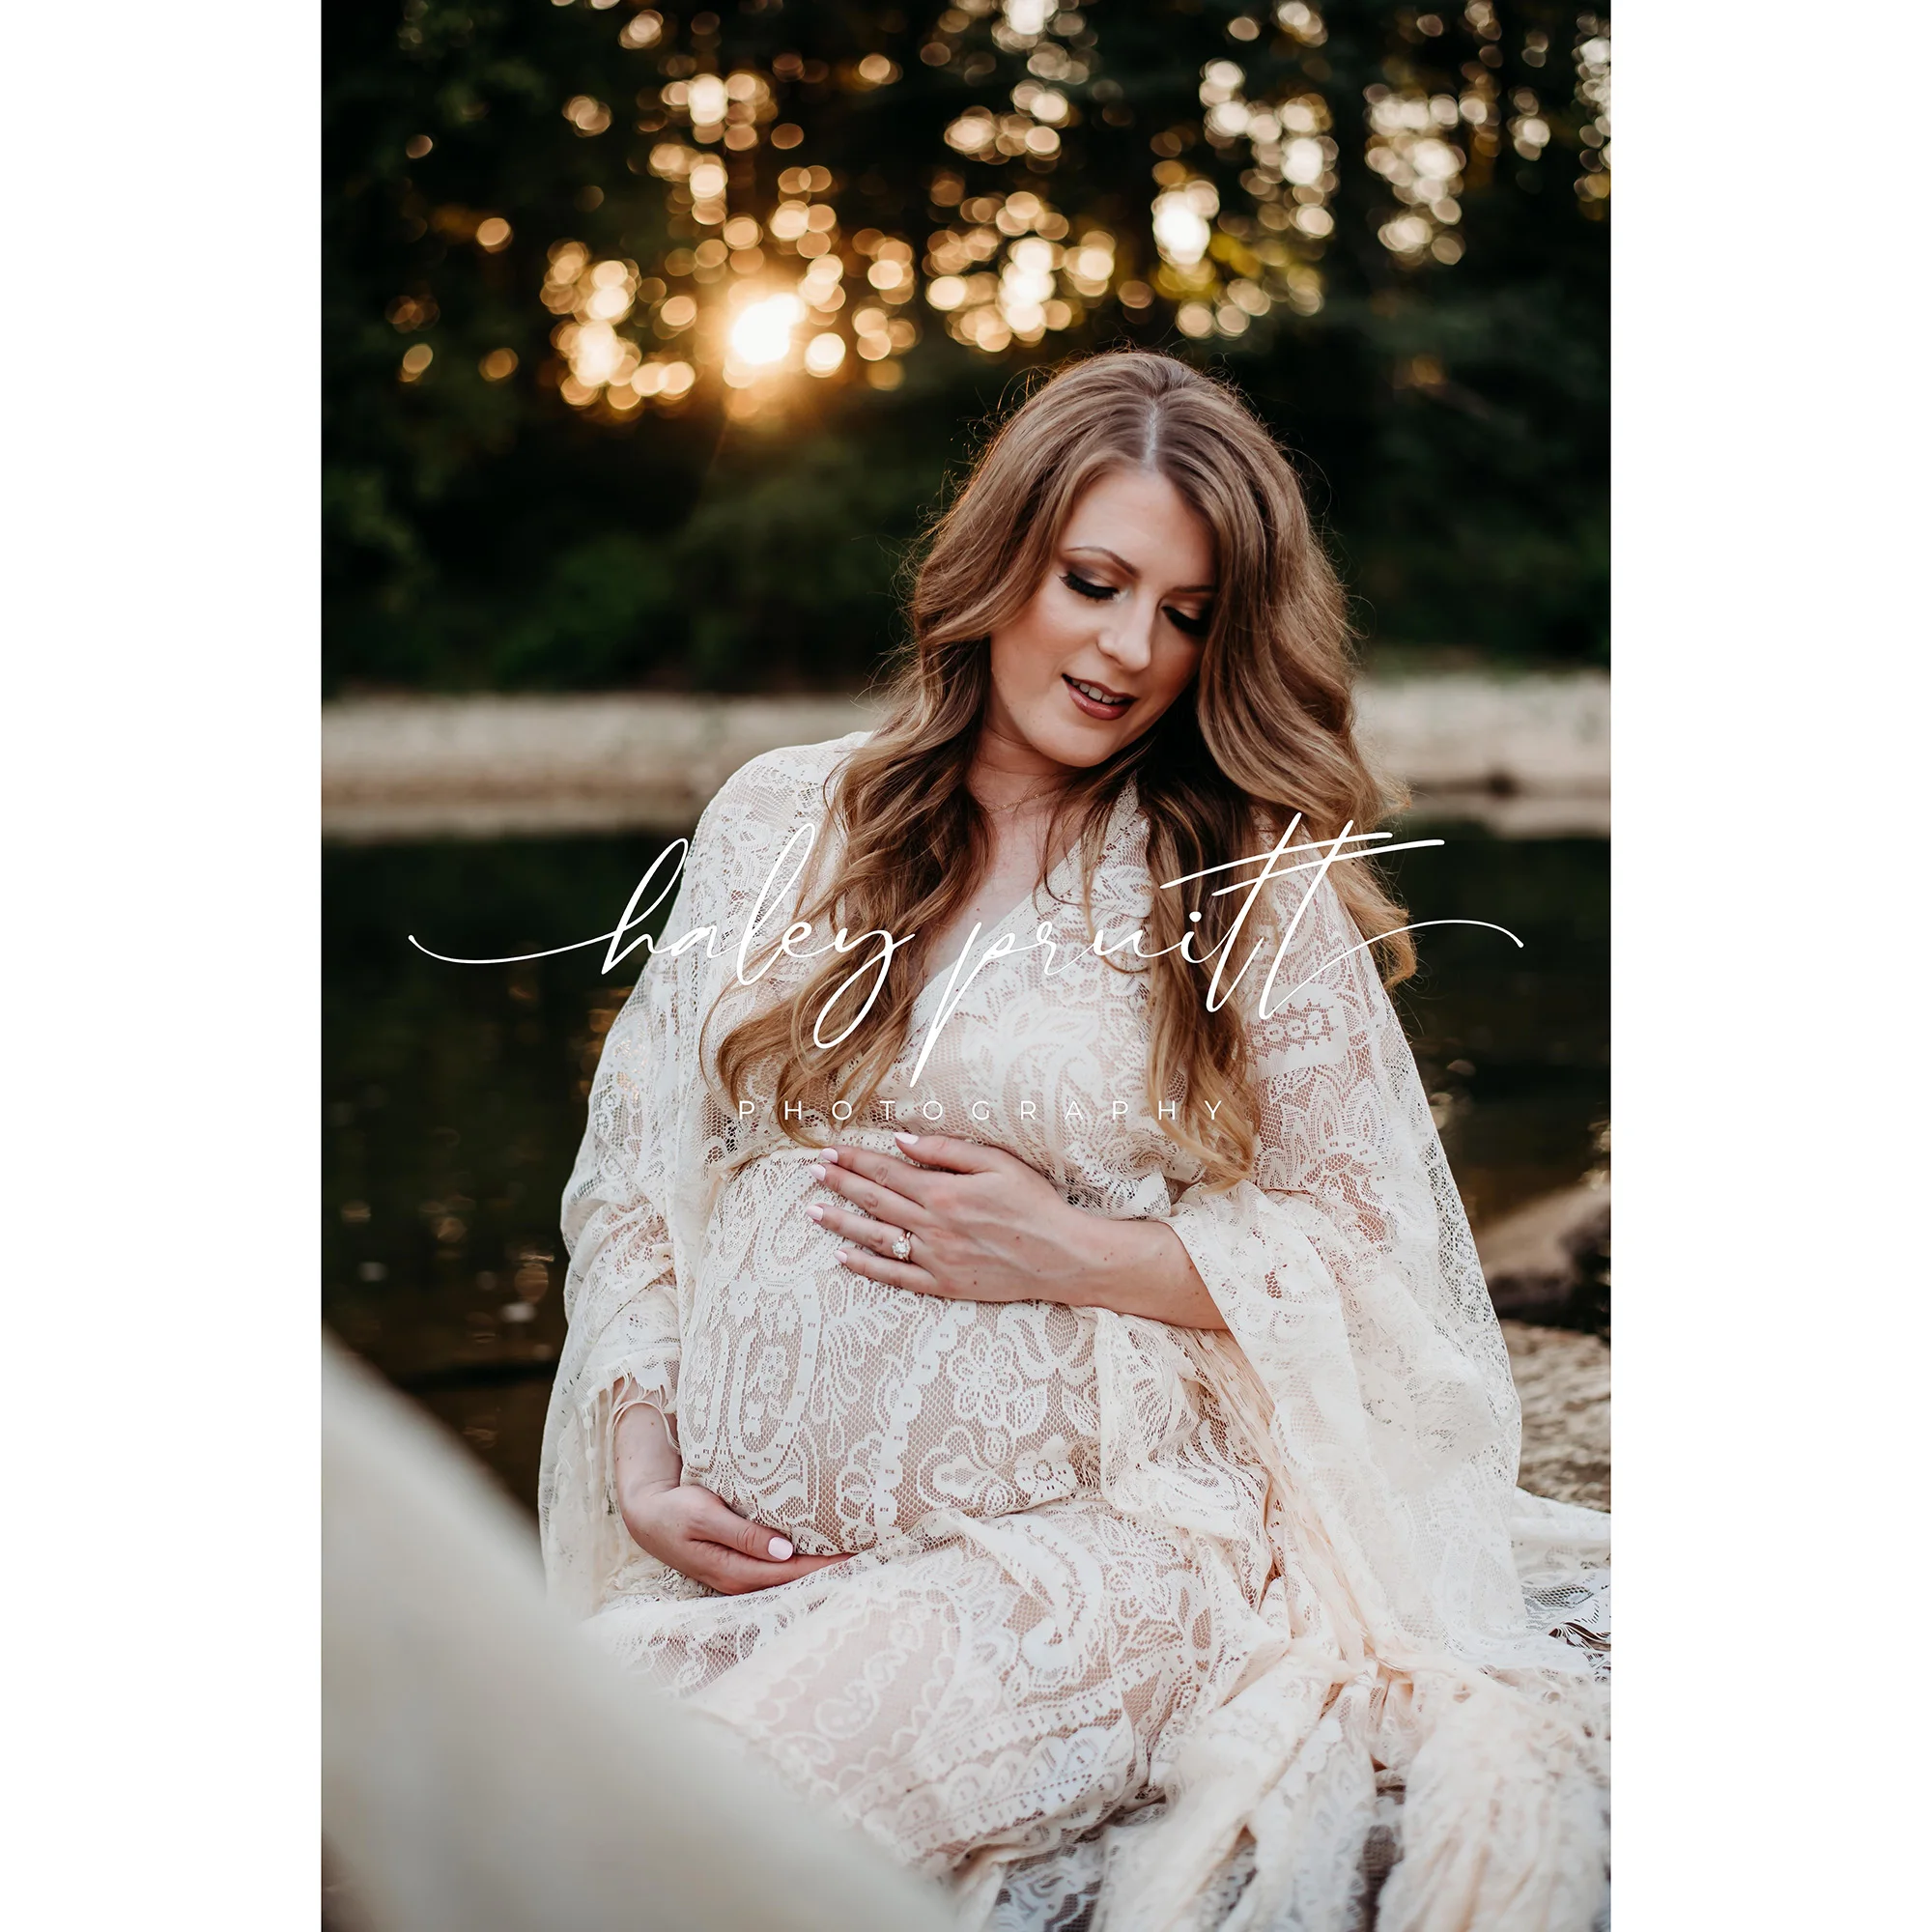 Don&Judy Bohemian Maternity Long Tassel Lace Dresses Photo Shoot Pregnancy Photography Robe Woman Gown Baby Shower Clothes enlarge